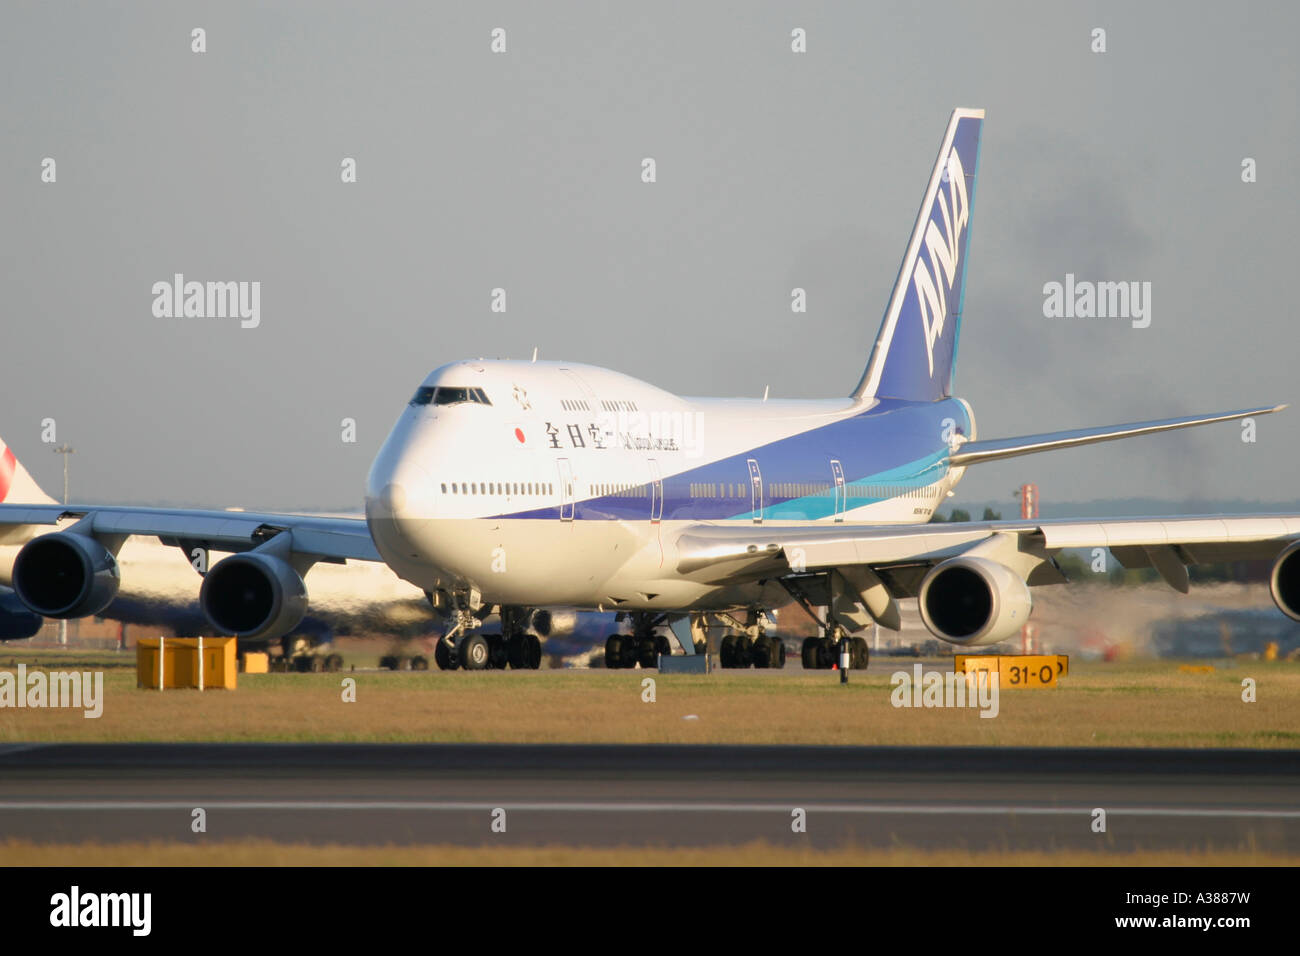 ANA All Nippon Airways Boeing 747 taxiing at London Heathrow Airport UK Stock Photo